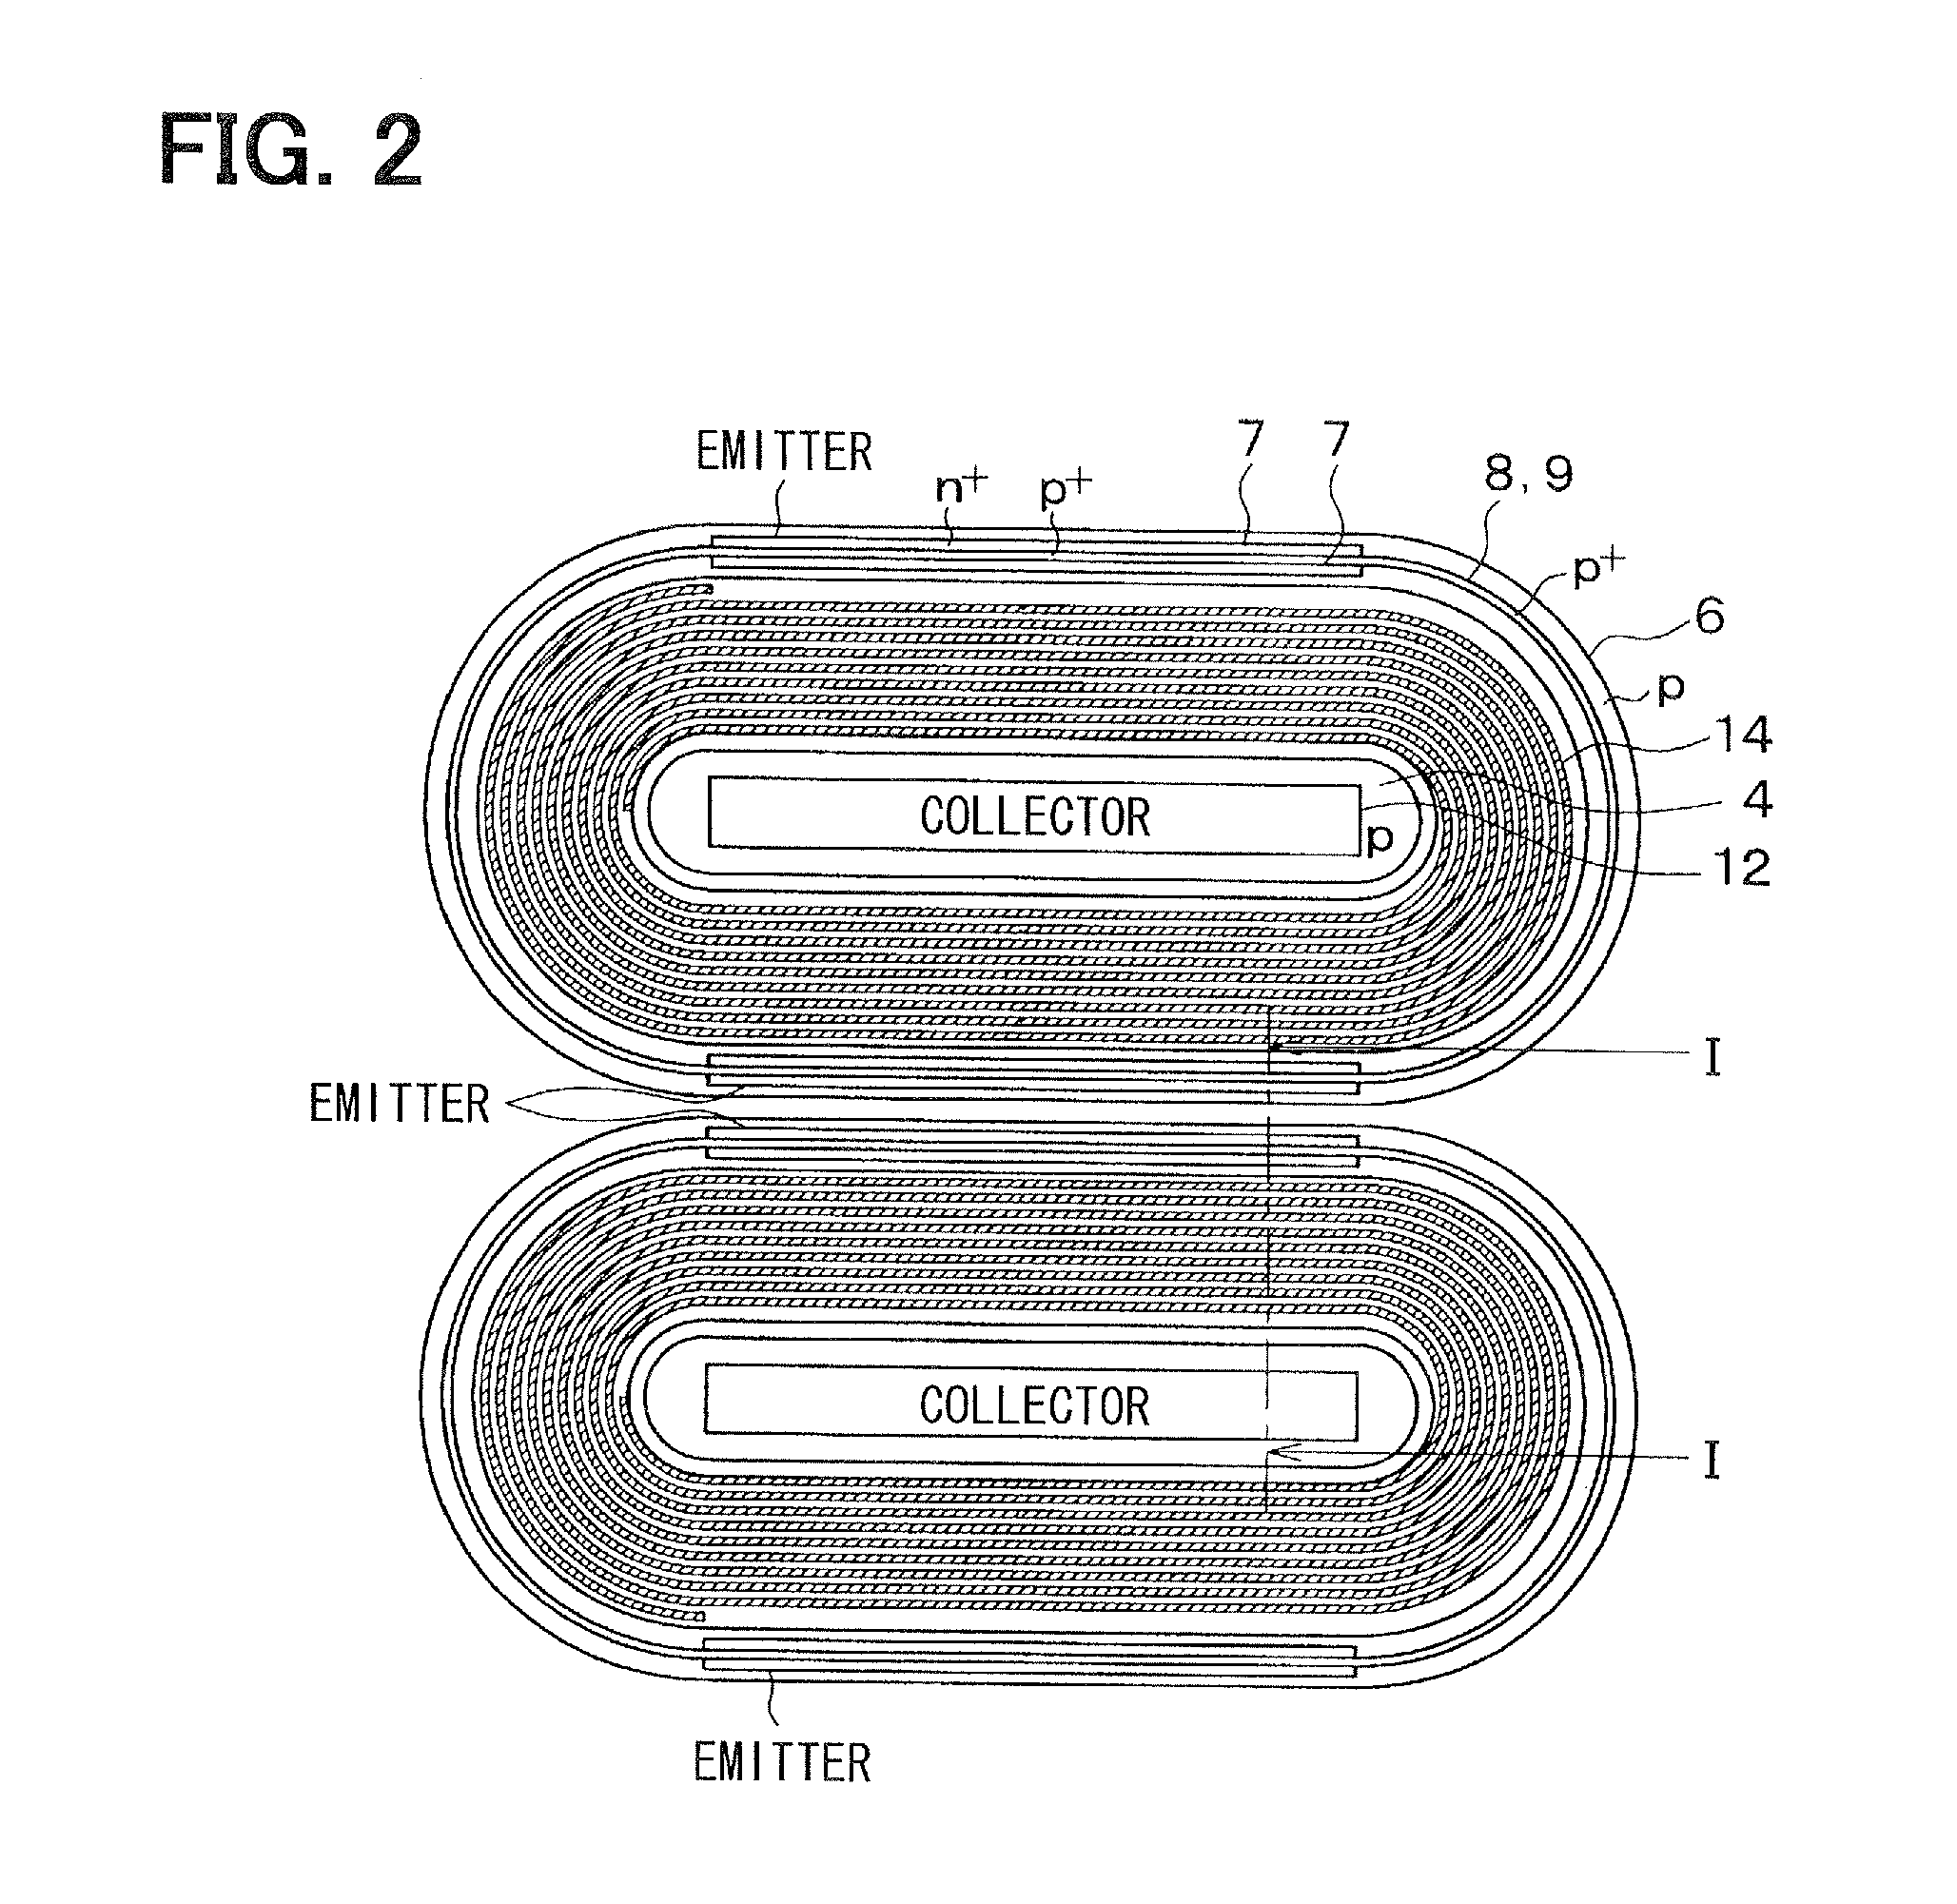 Lateral insulated gate bipolar transistor